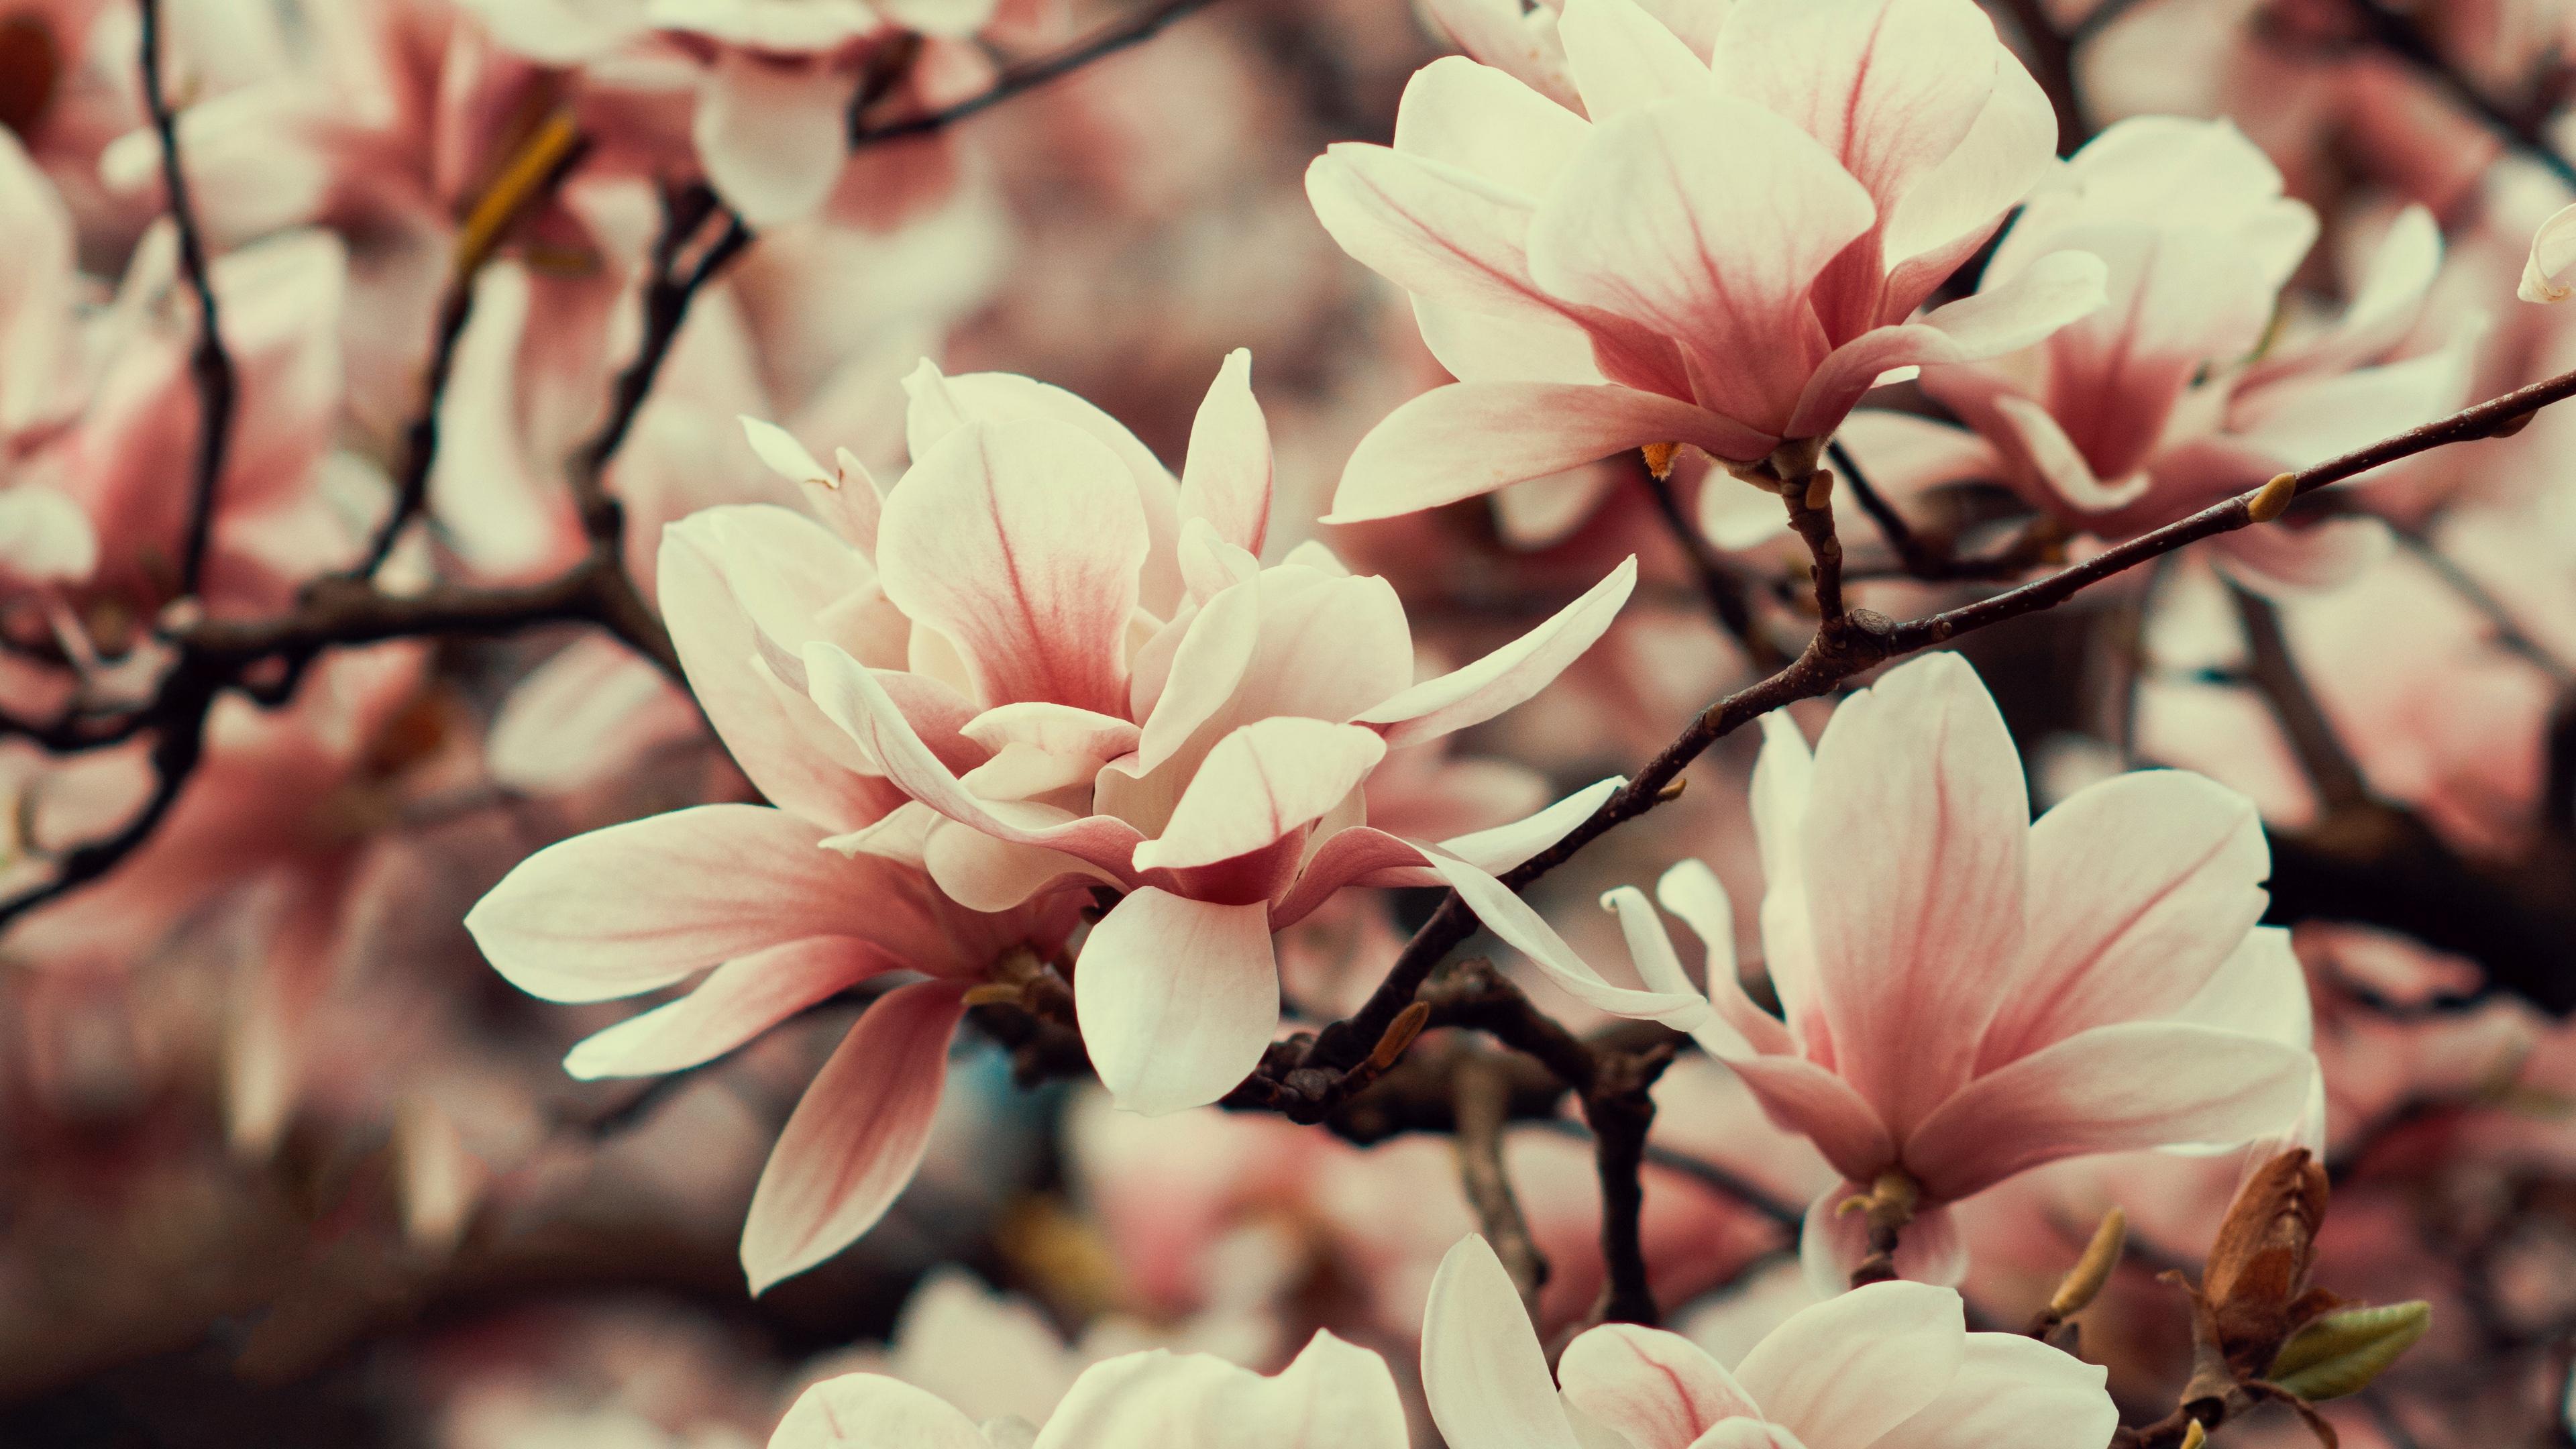 Download wallpaper 3840x2160 magnolia, flowers, branches